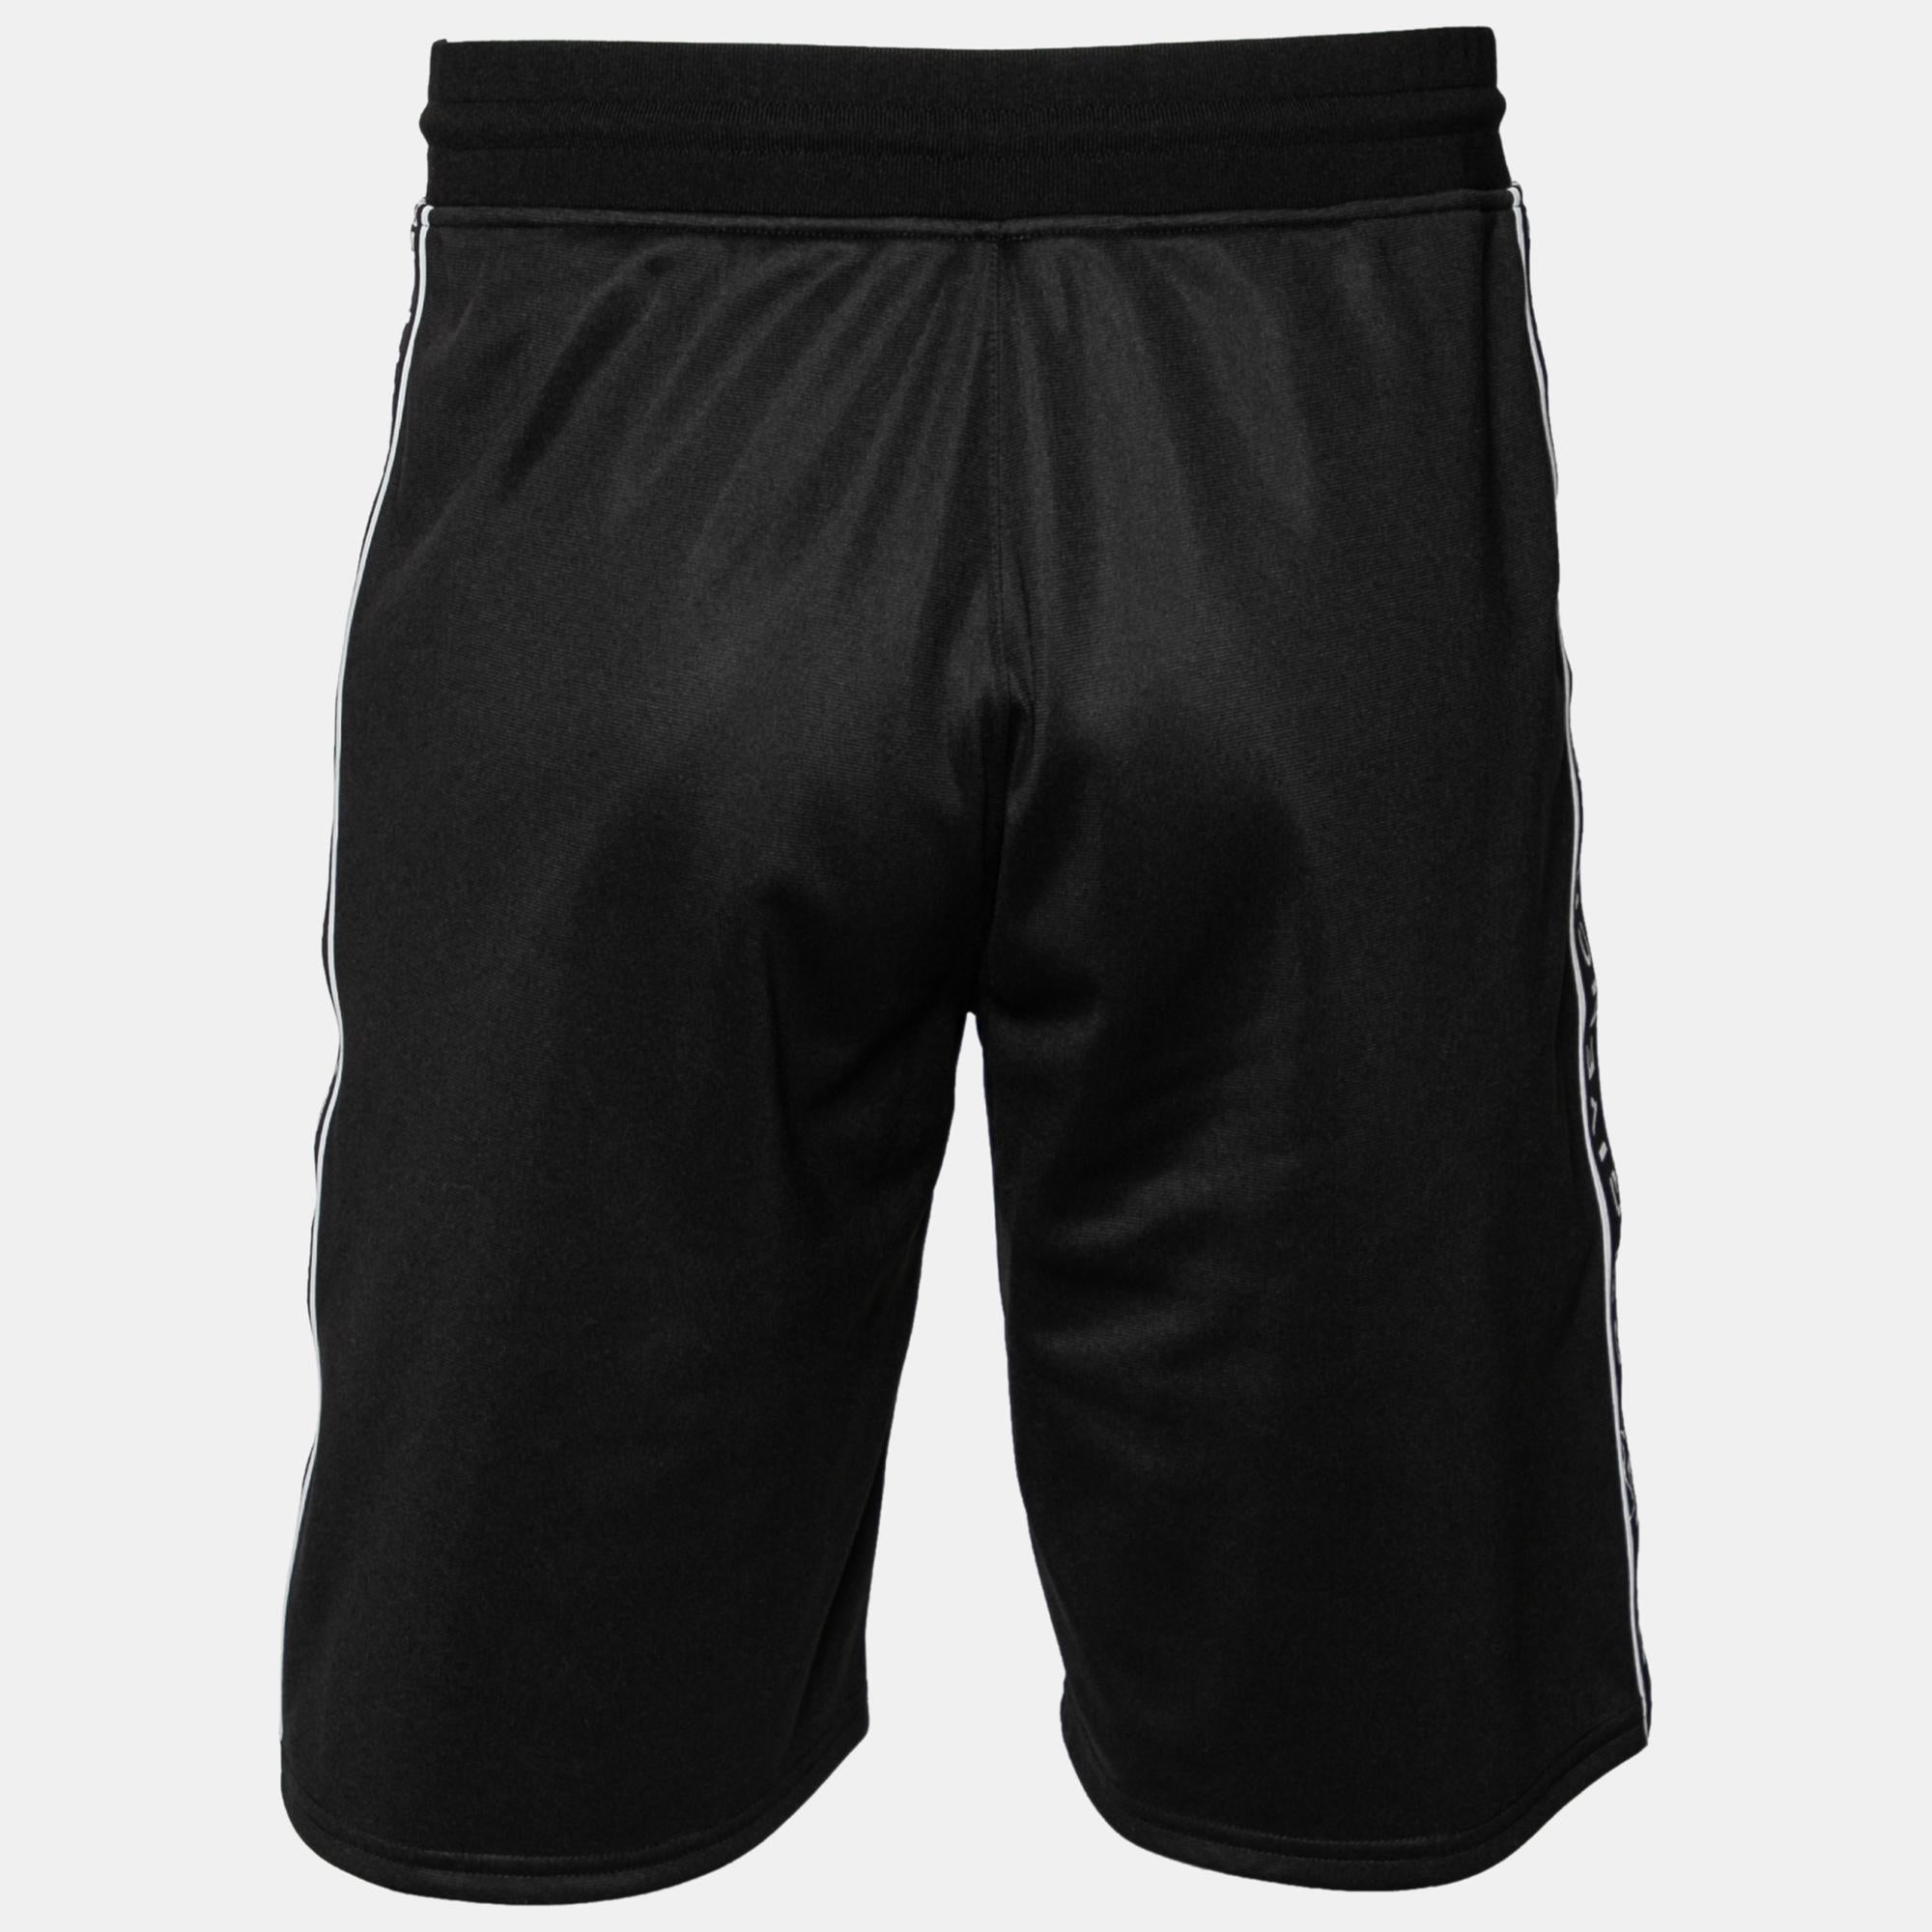 Whether you want to just lounge around or go out to run errands, these Givenchy shorts will be a stylish pick and will make you feel comfortable all day. It has been made using high-grade materials and the creation will go well with sneakers and